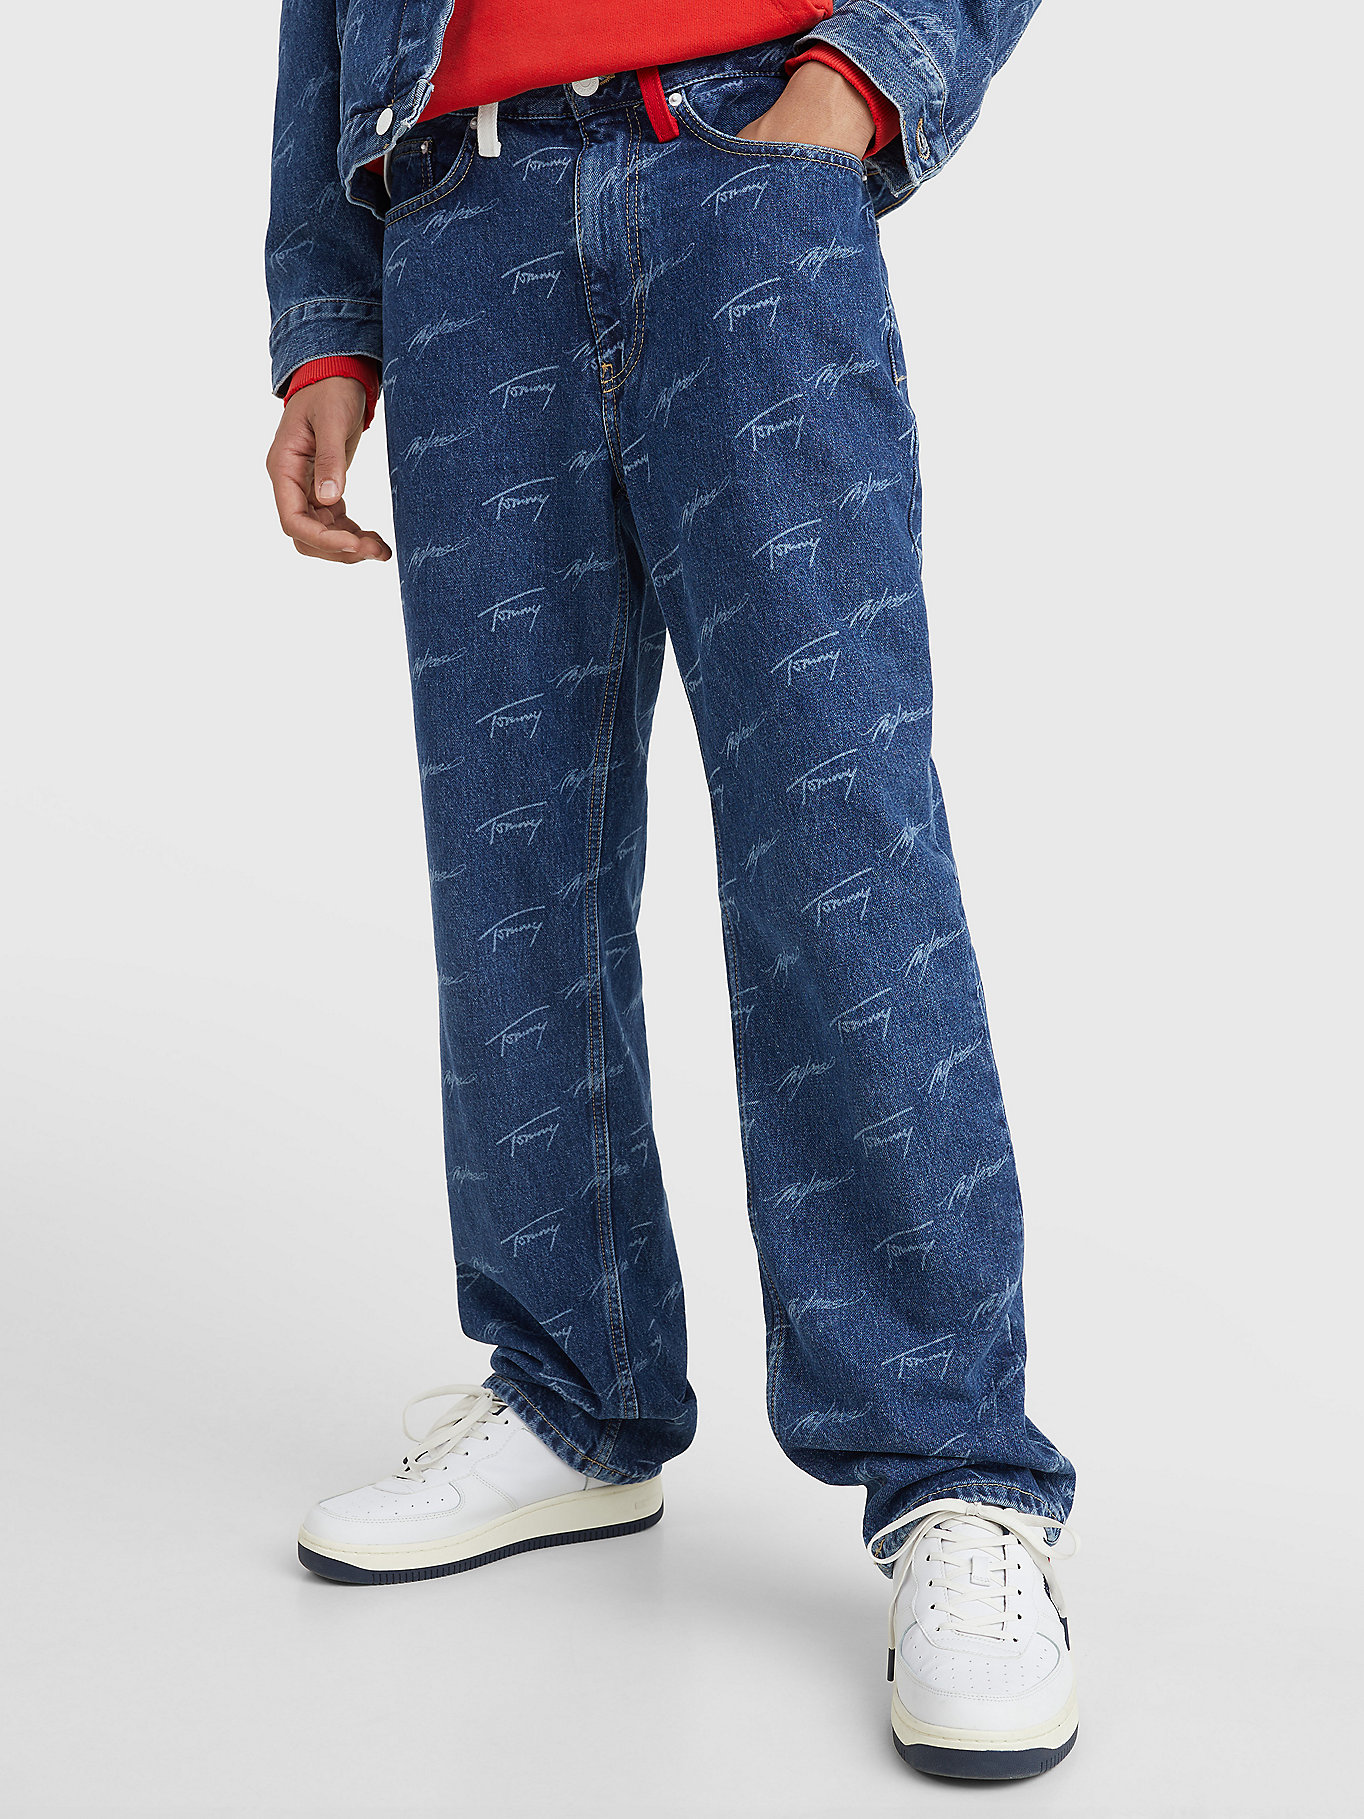 Tommy Jeans x MYne Baggy Jeans - TOMMY HILFIGER Official A New Season ...